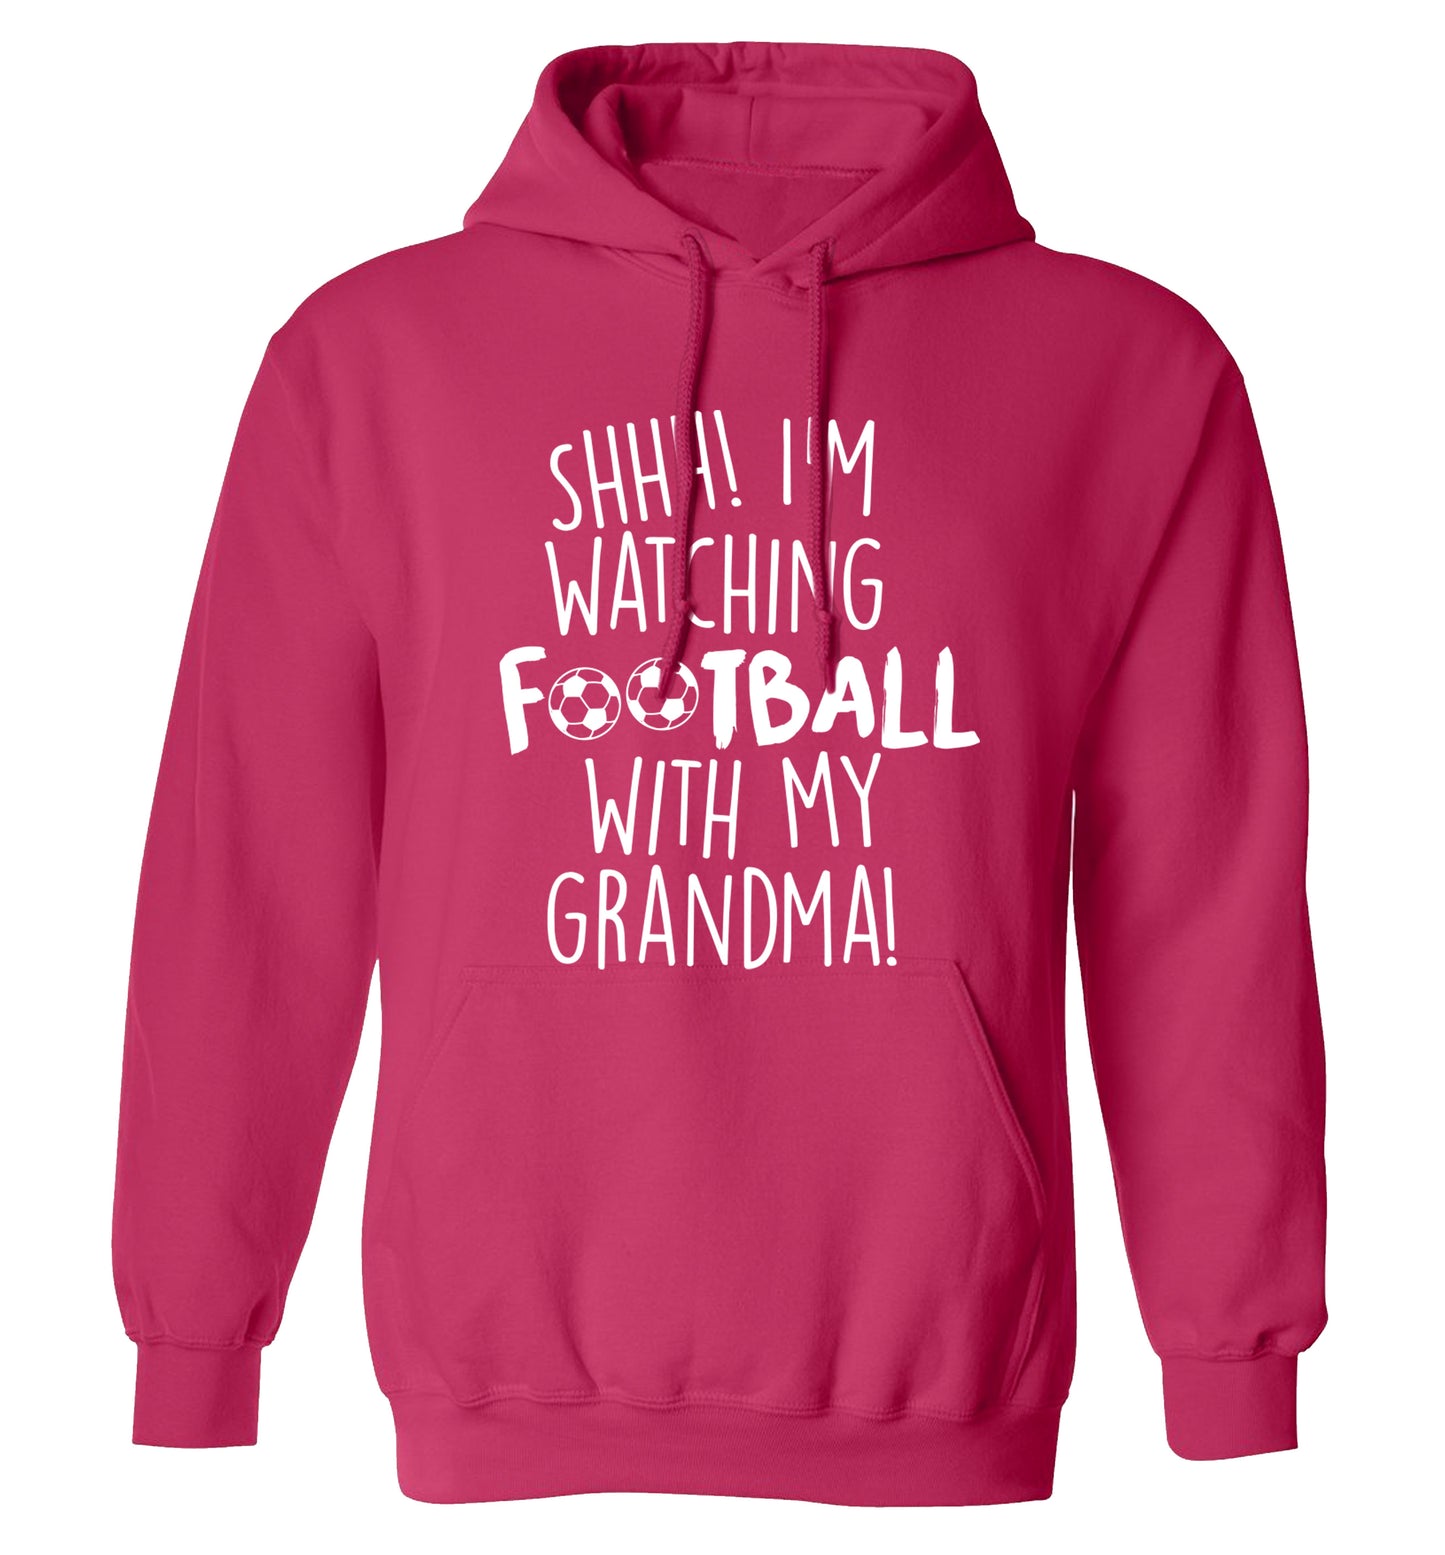 Shhh I'm watching football with my grandma adults unisexpink hoodie 2XL